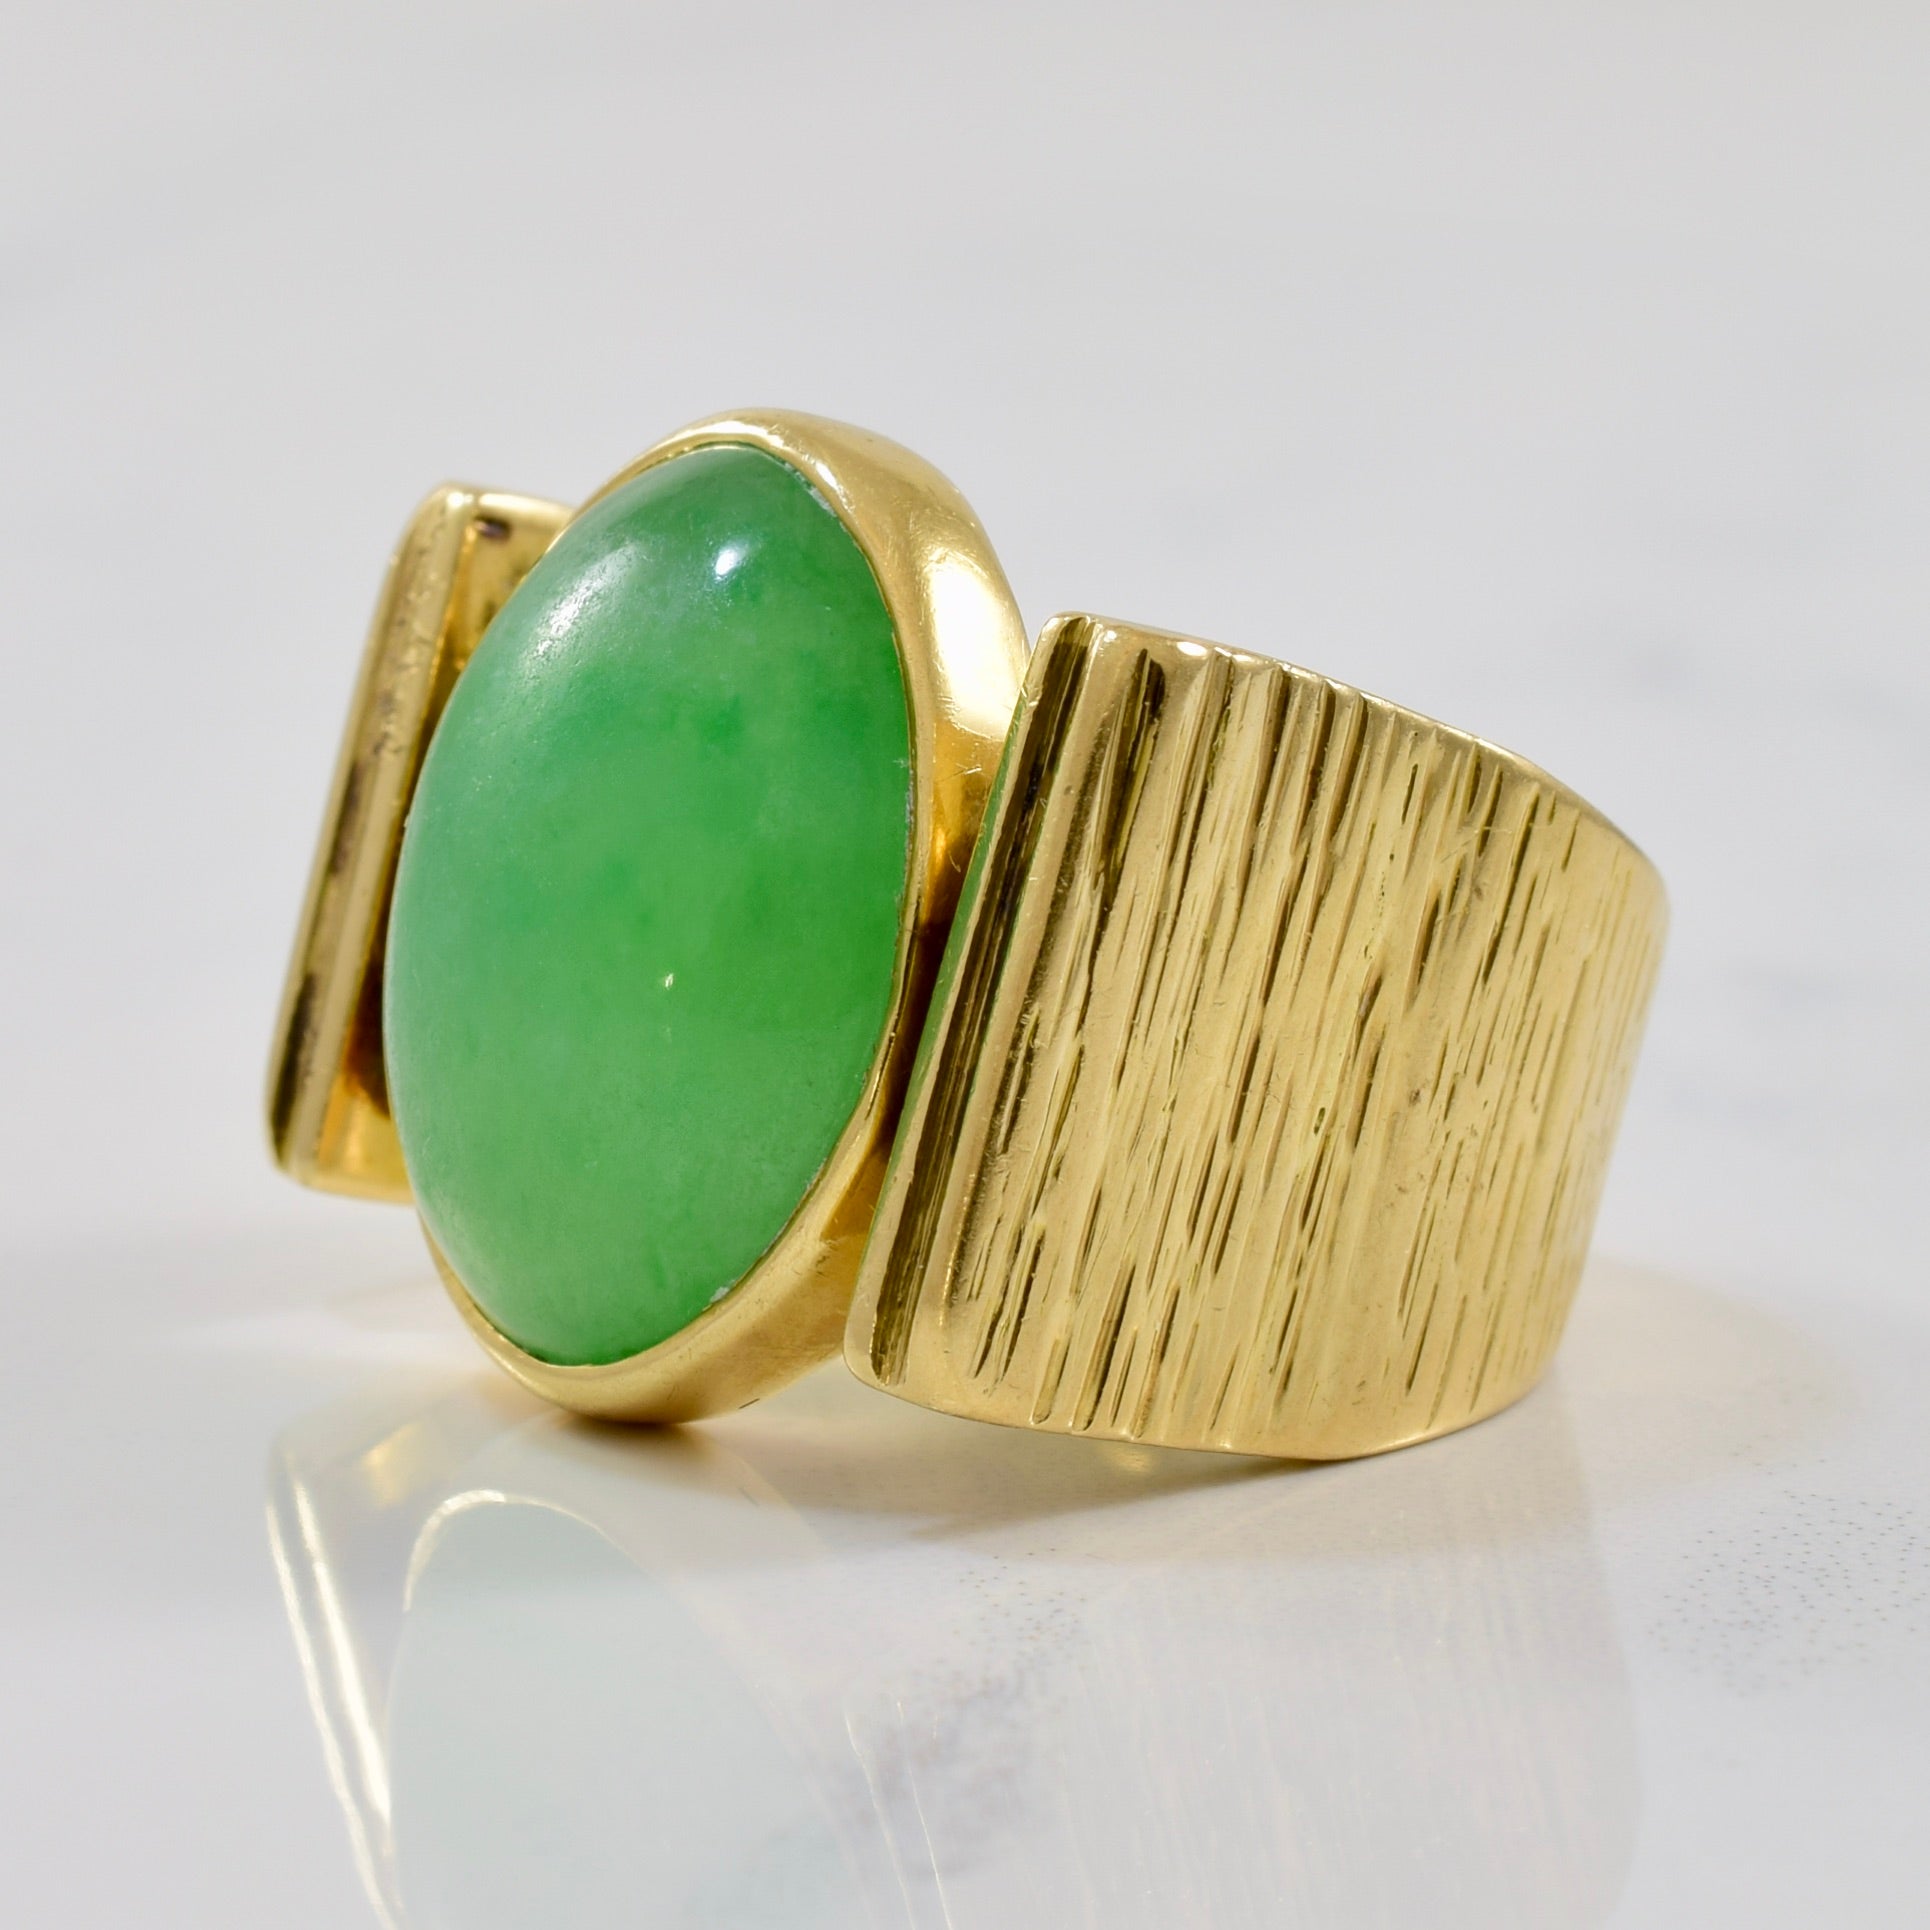 Cocktail jade ring, vintage jade ring for sale in Canada, antique jade ring